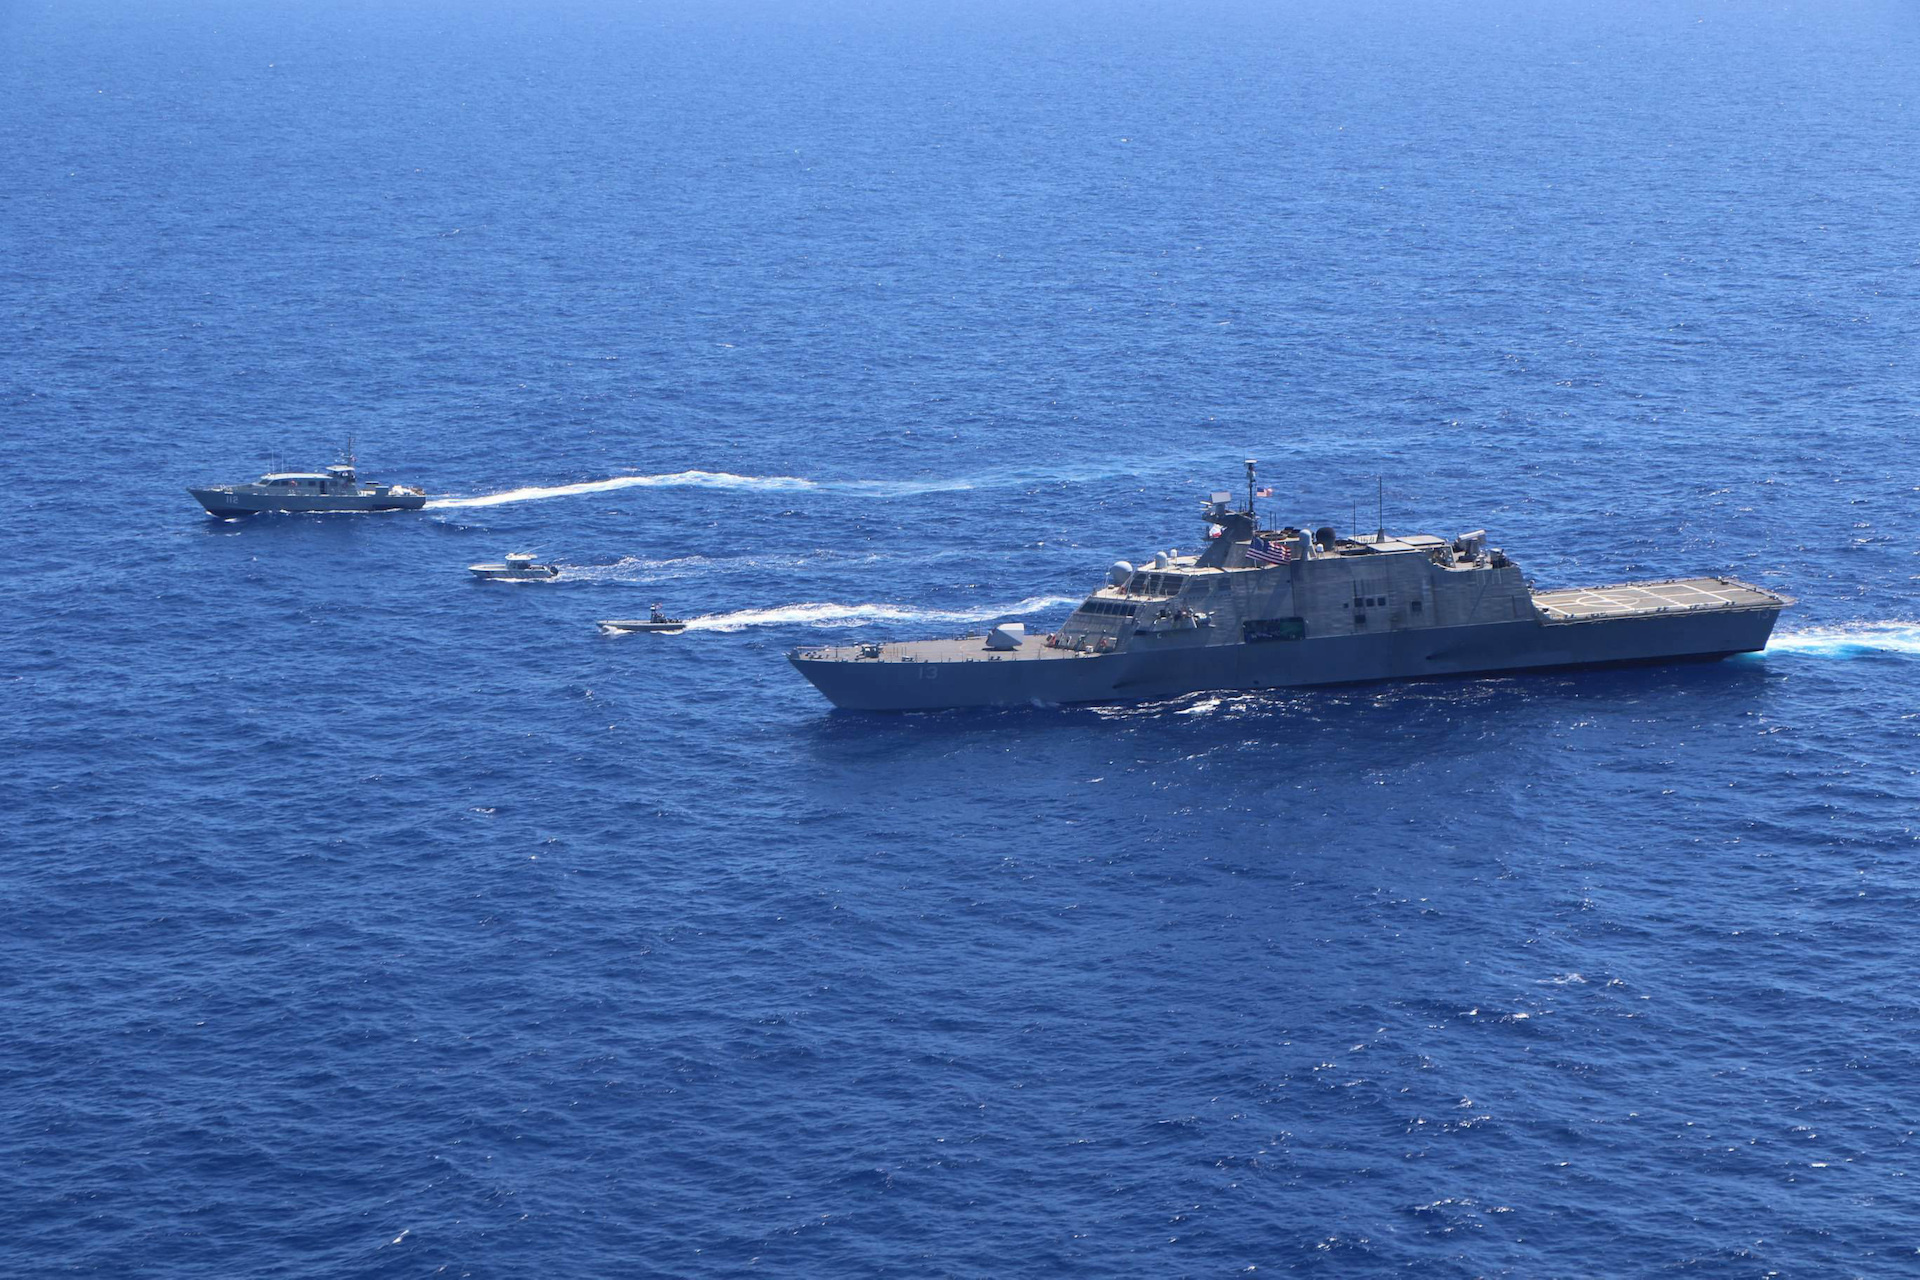 Wichita Conducts Maritime Interdiction Exercise with Dominican Republic